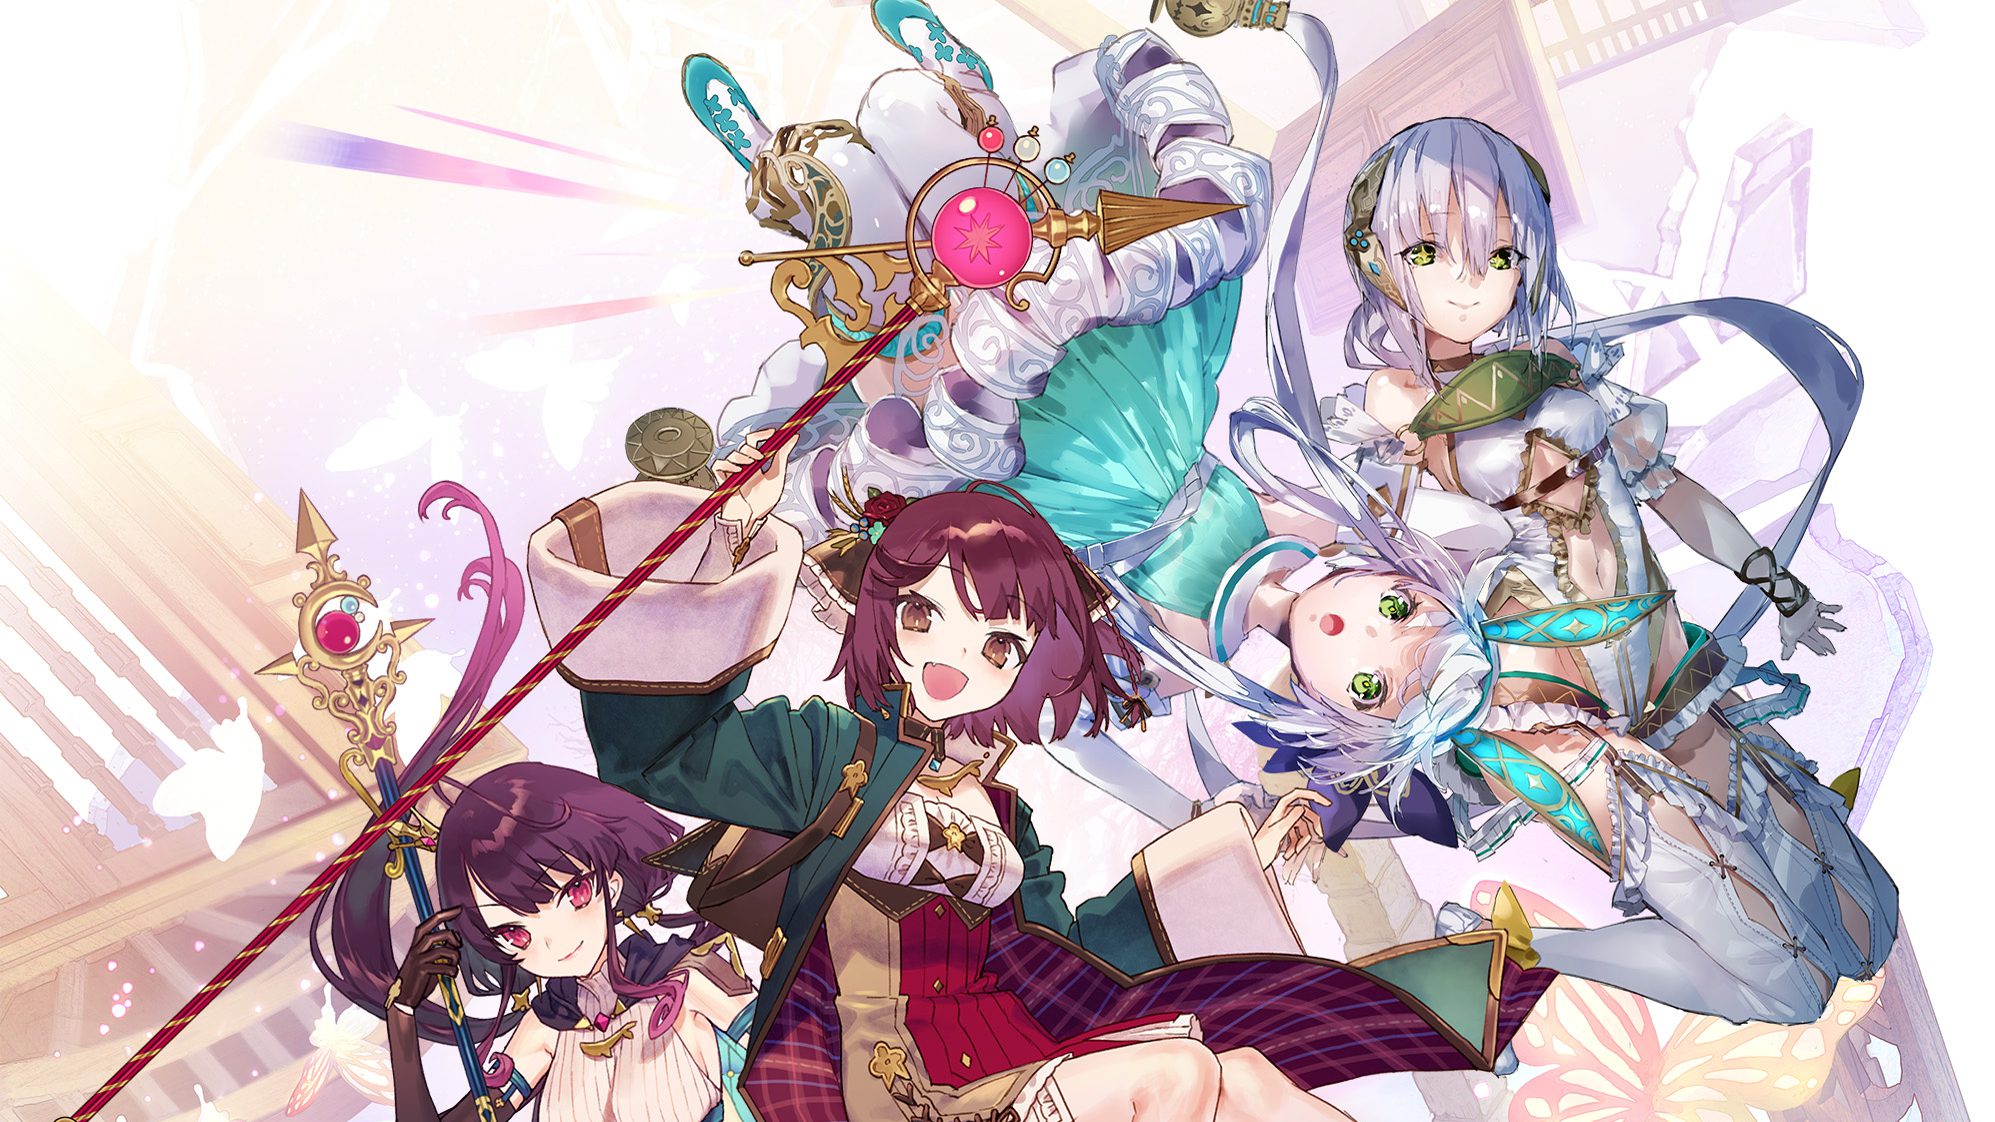 Video Game Atelier Sophie 2: The Alchemist of the Mysterious Dream HD Wallpaper | Background Image